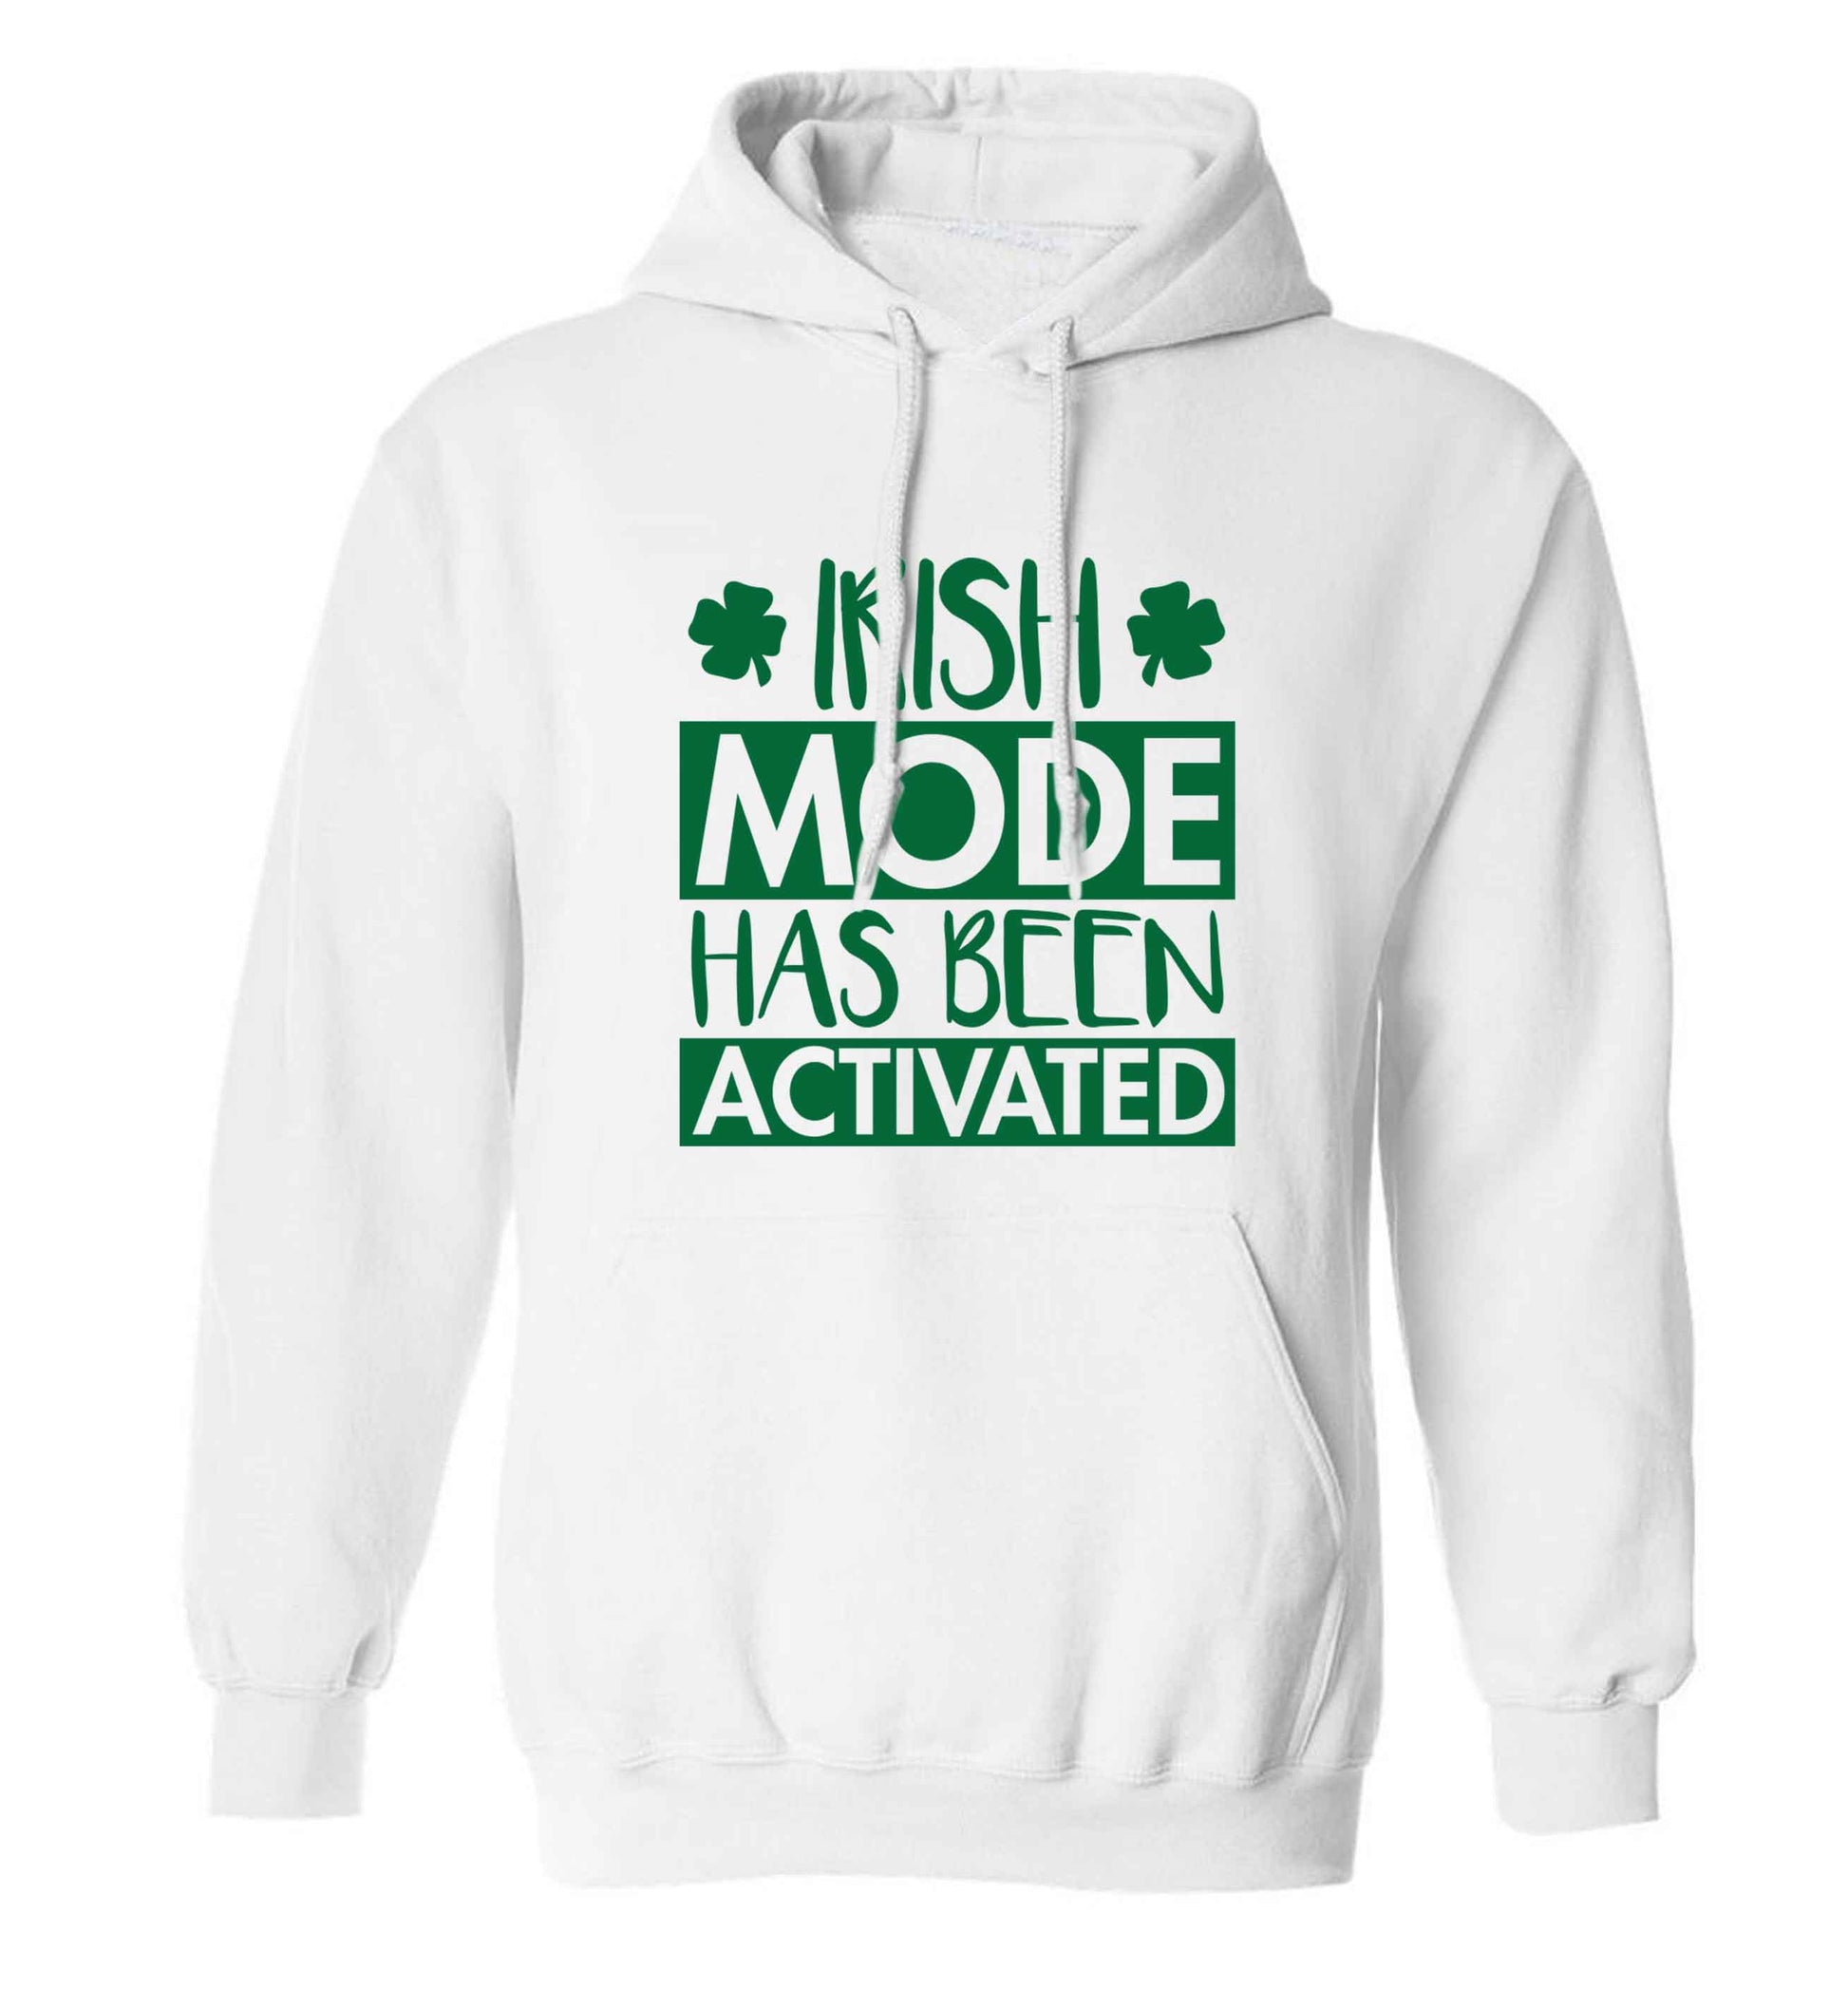 Irish mode has been activated adults unisex white hoodie 2XL